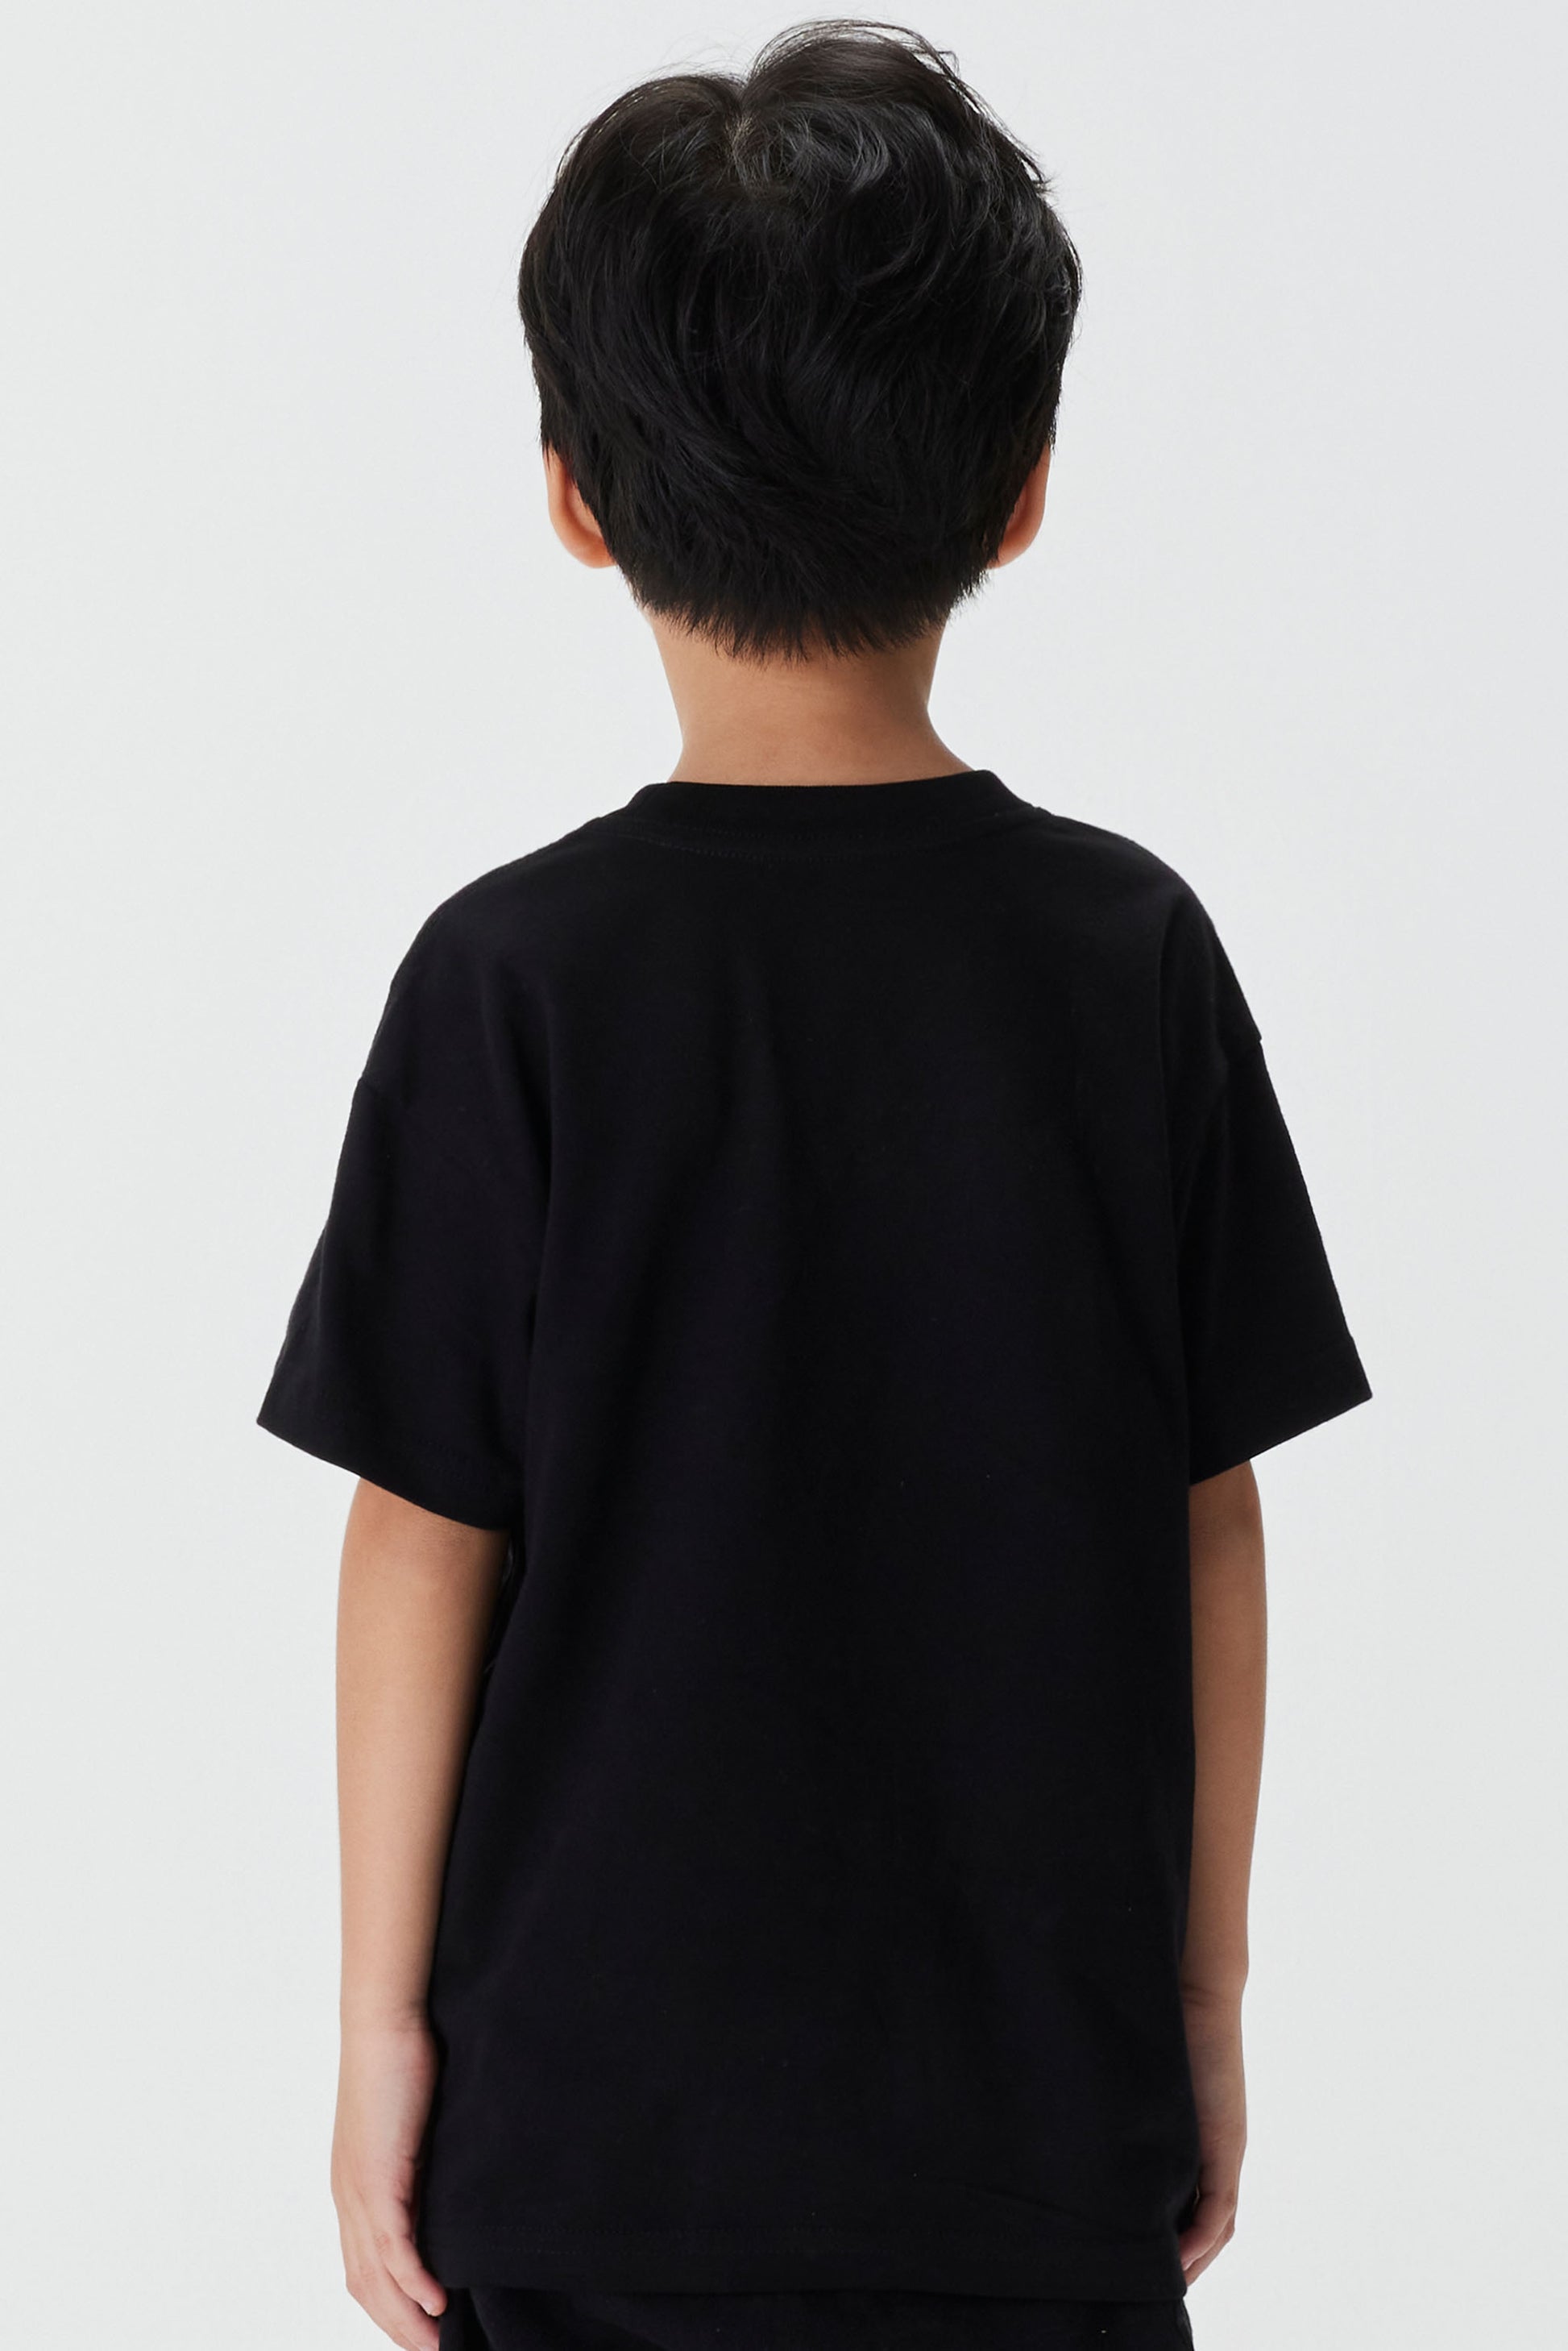 – - REFLECTIVE KIDS PANTHER BLACK S/SLEEVE TEE